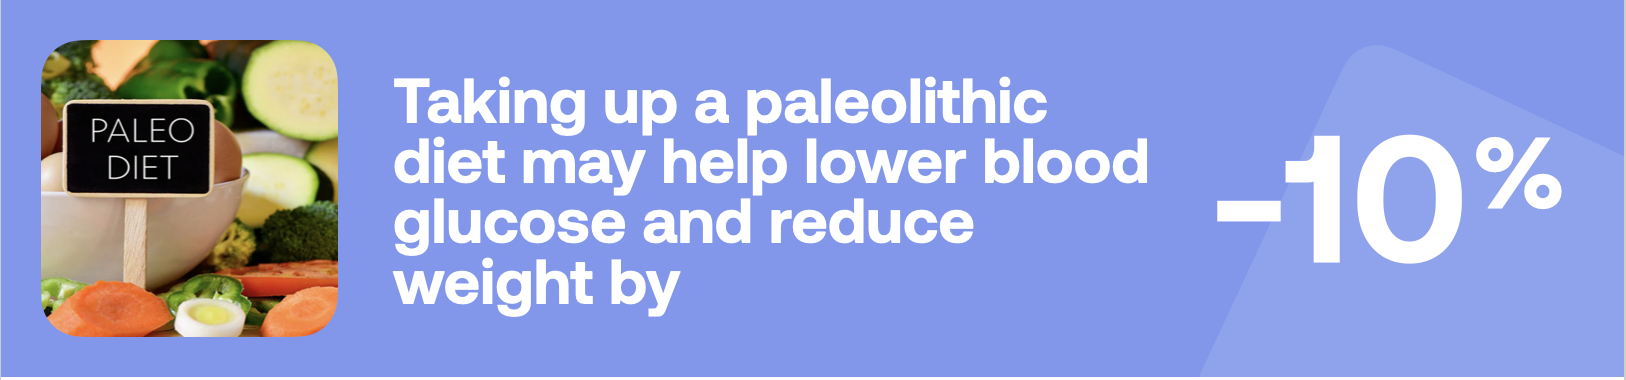 Taking up a paleolithic diet may help lower blood glucose and reduce weight by to -10%